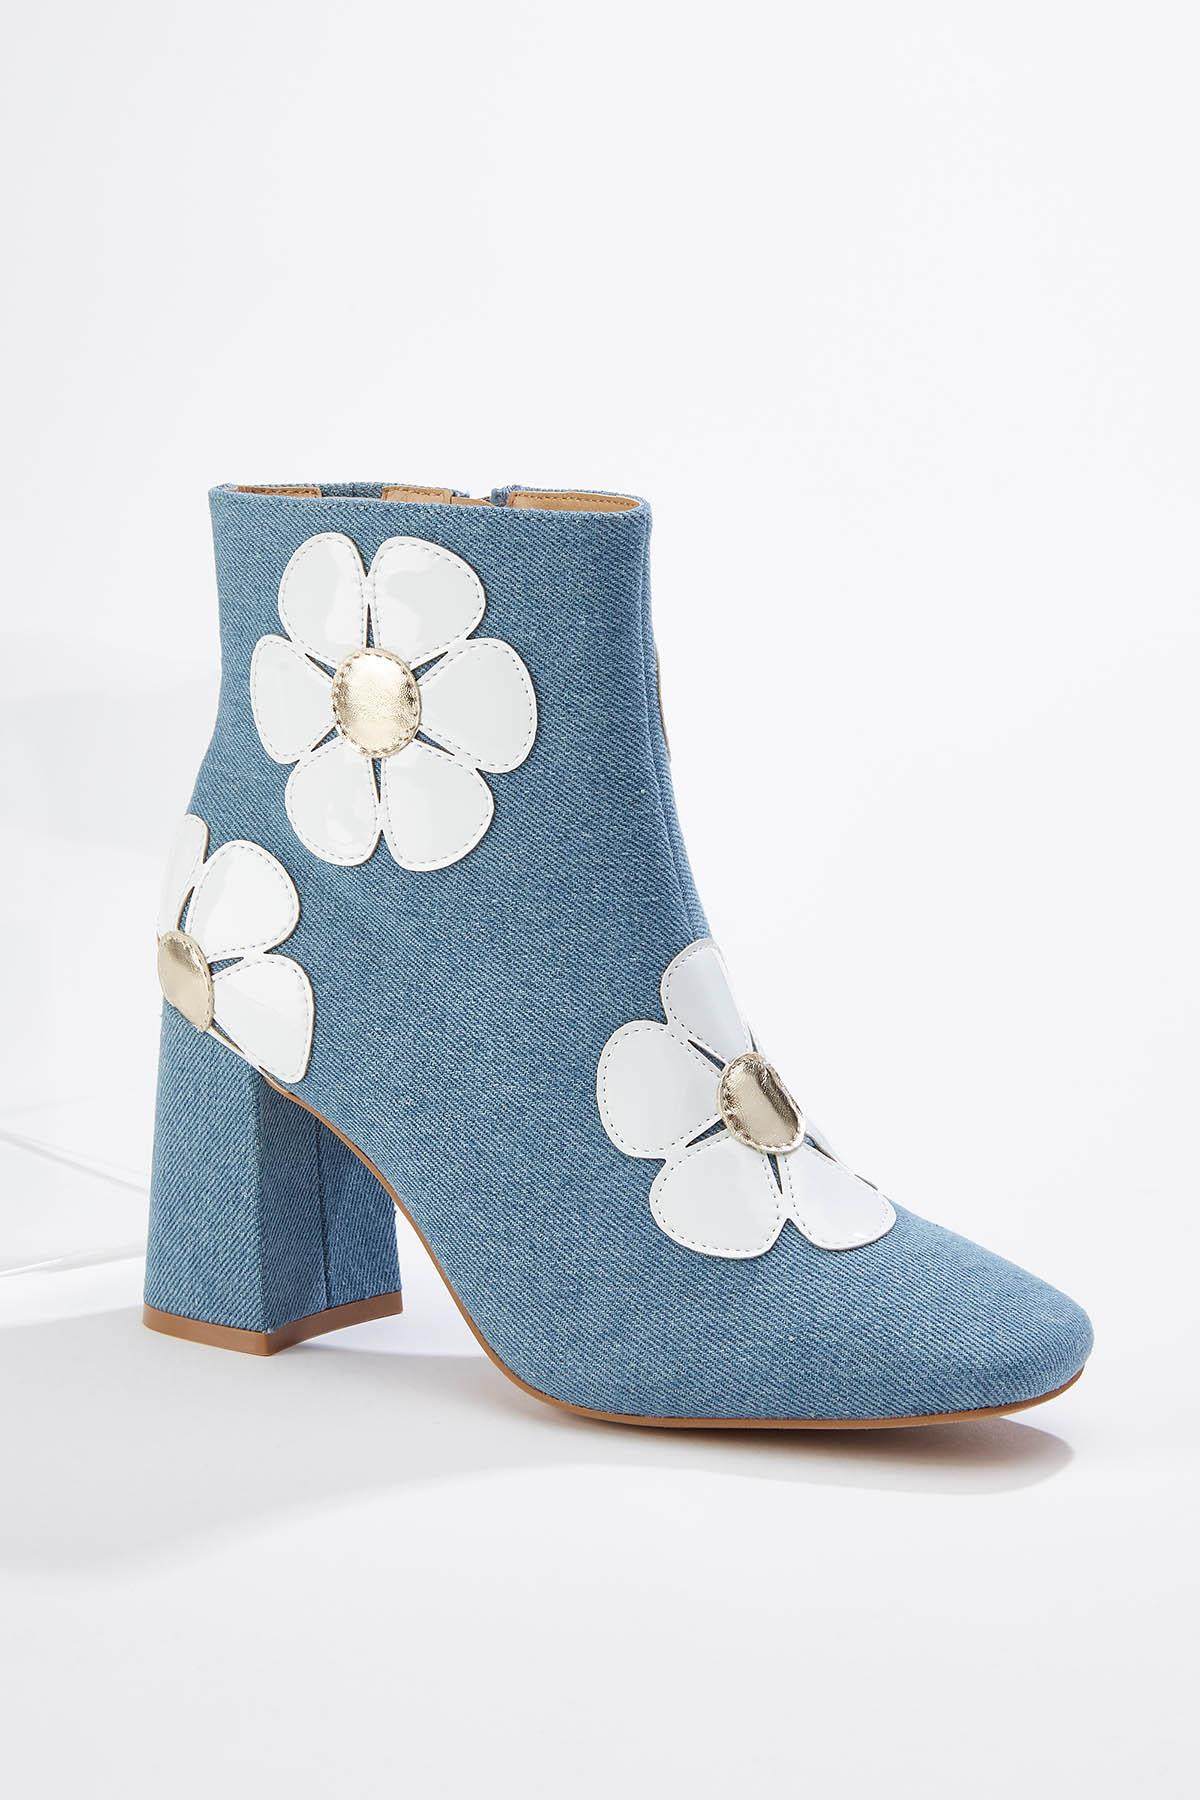 Daisy Denim Ankle Boots